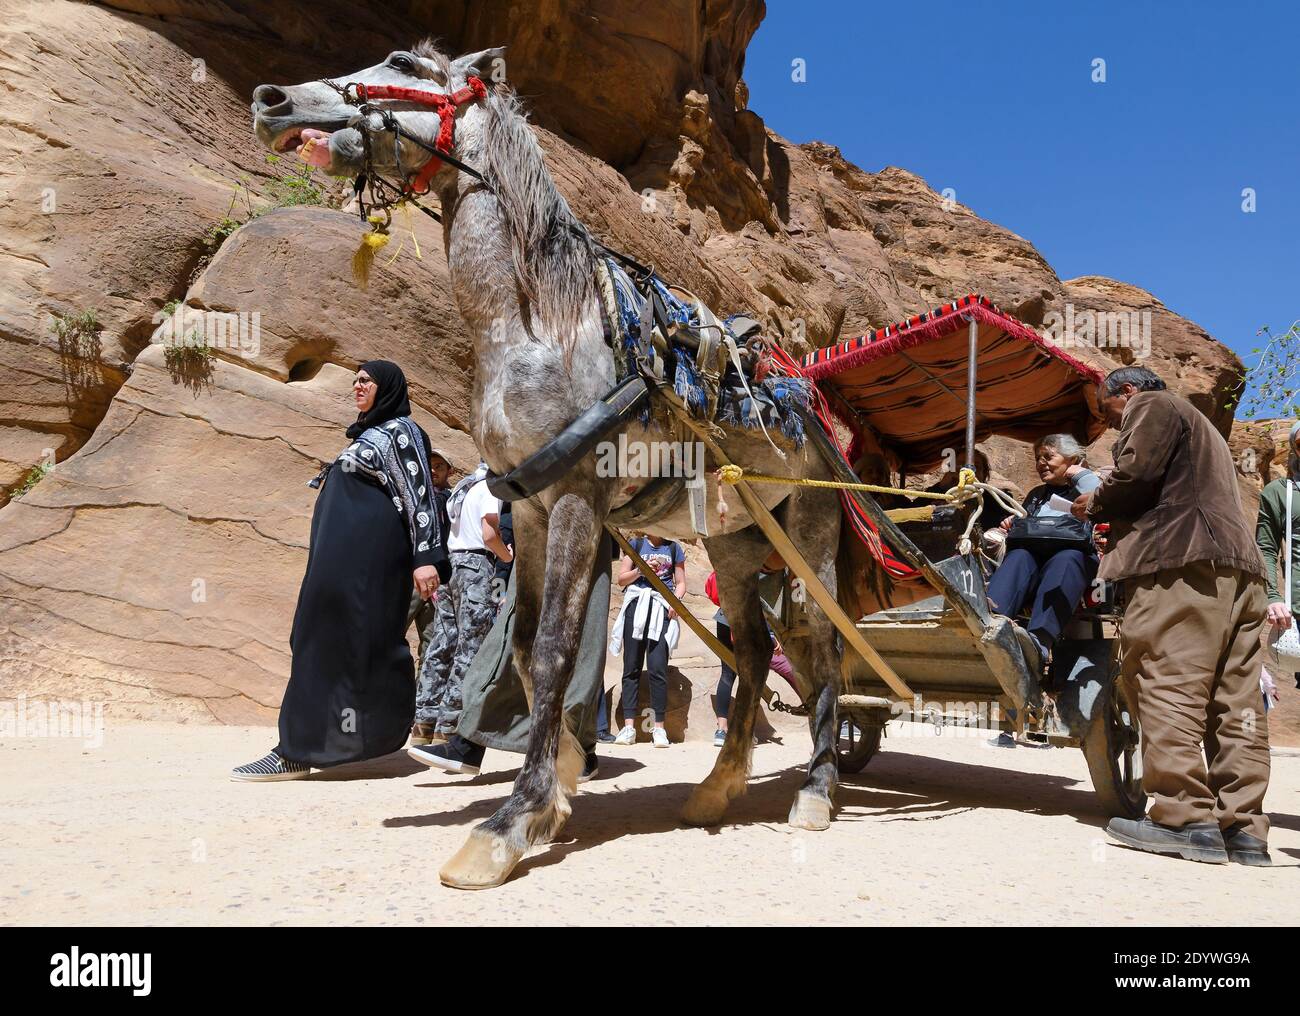 Horse carriage in the Siq, entrance to Petra, Jordan. Tourists horse riding. Stock Photo